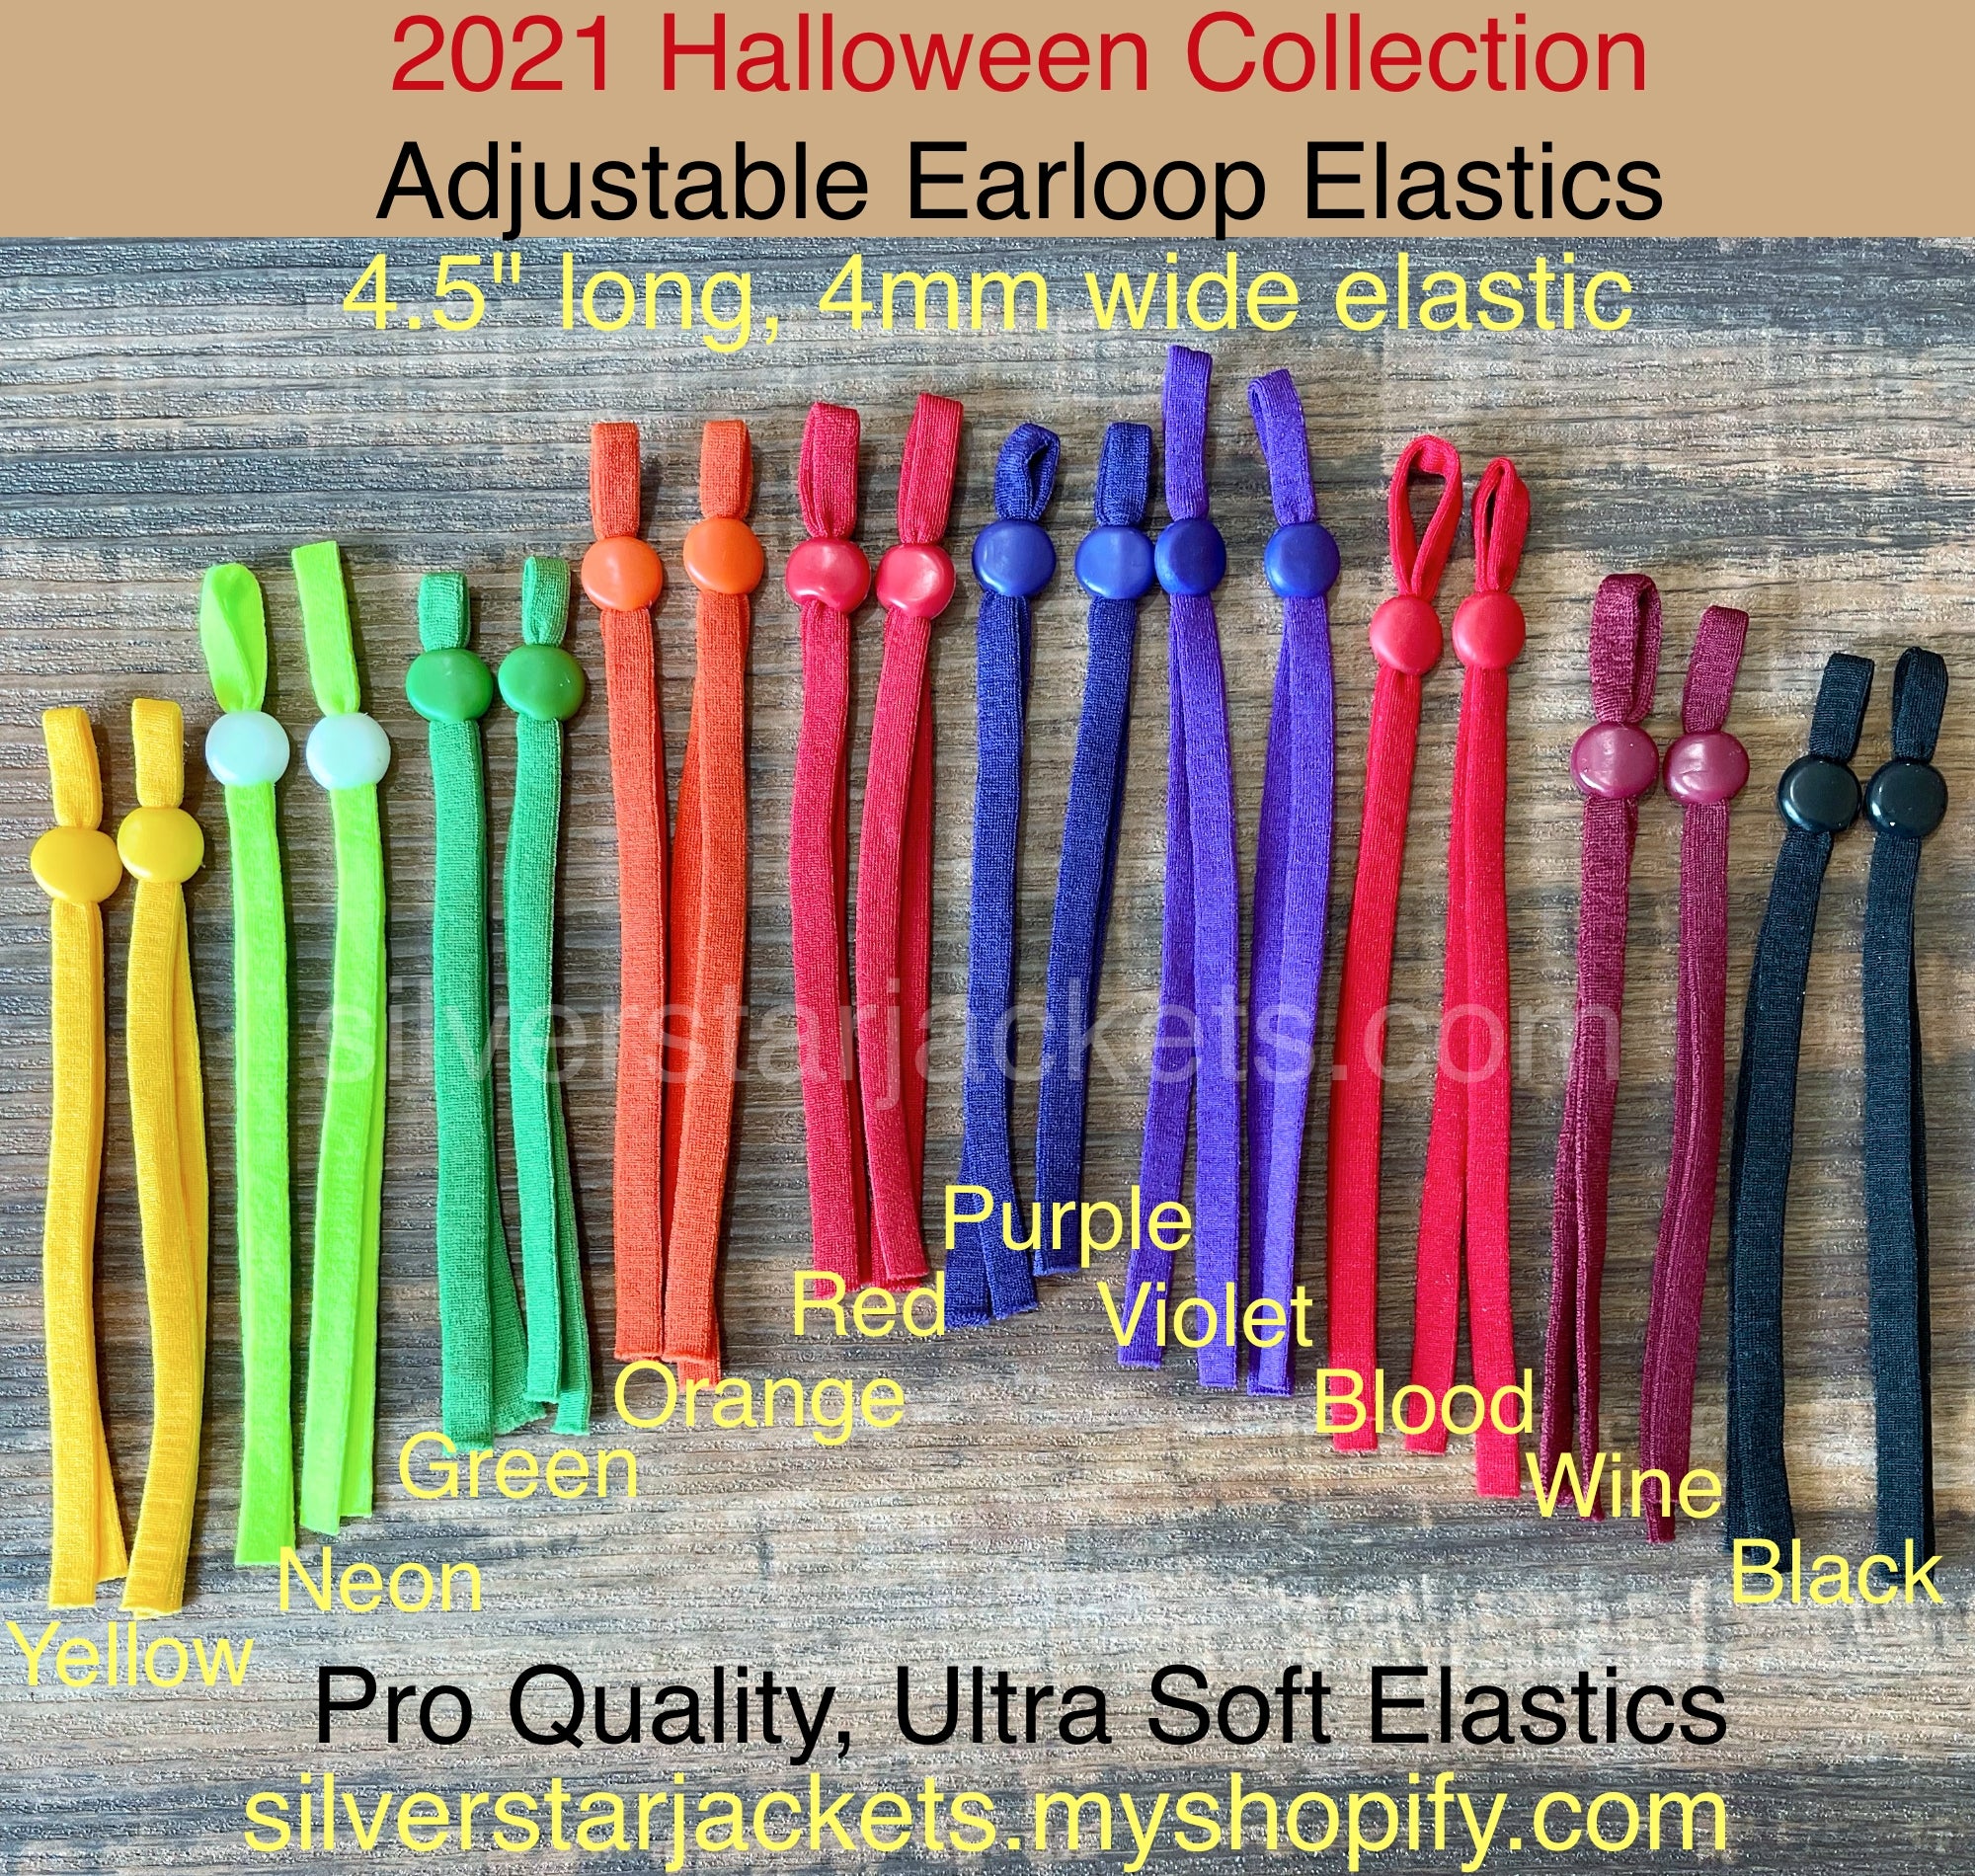 2021 Halloween Collection of elastic earloops for sewing masks in TEN colors. Orange, Purple, Blood Red, Black and more. Ships from Ohio.